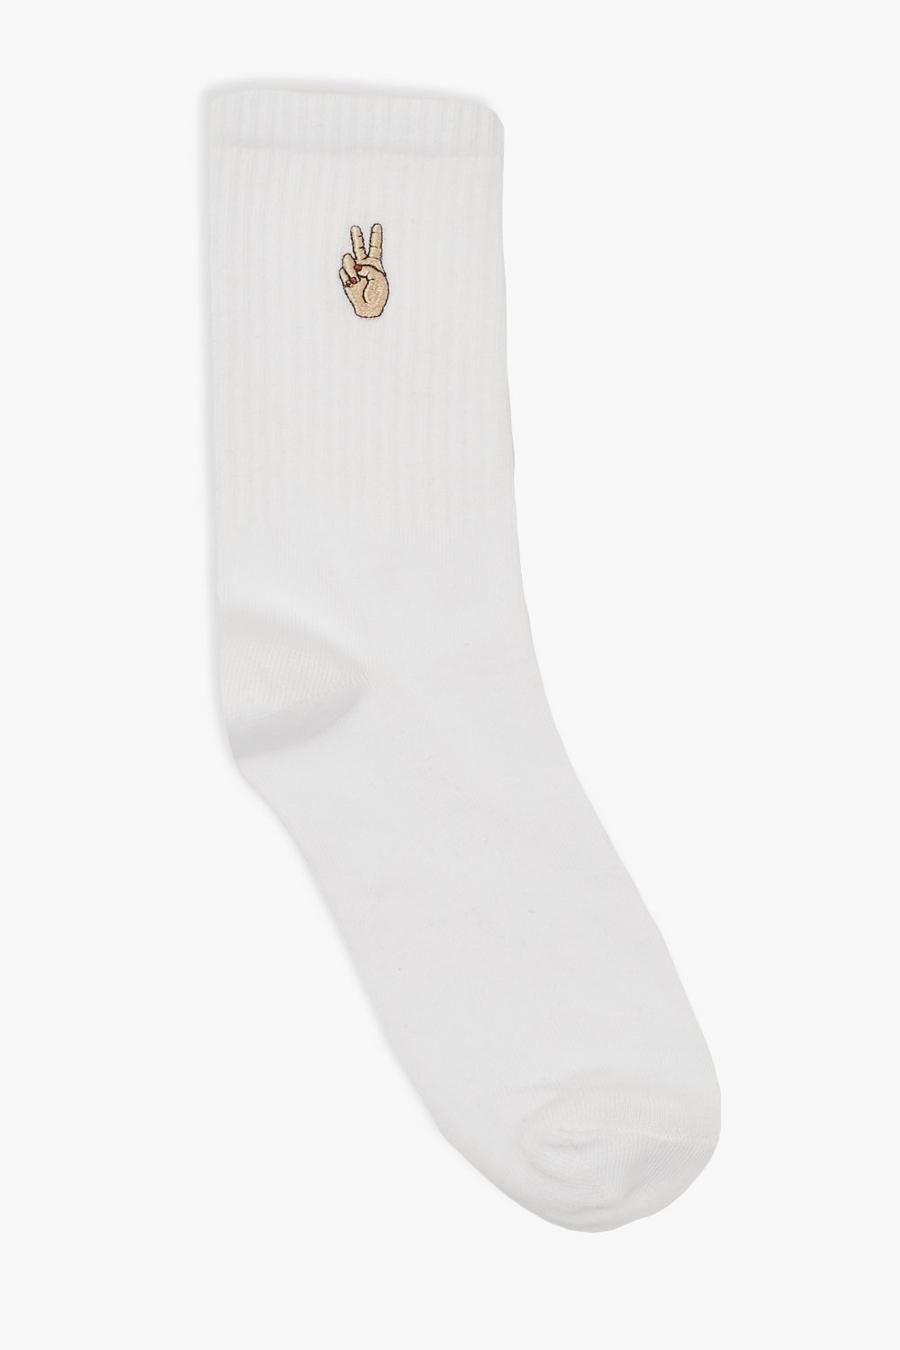 Chaussettes blanches signe paix brodé, White image number 1